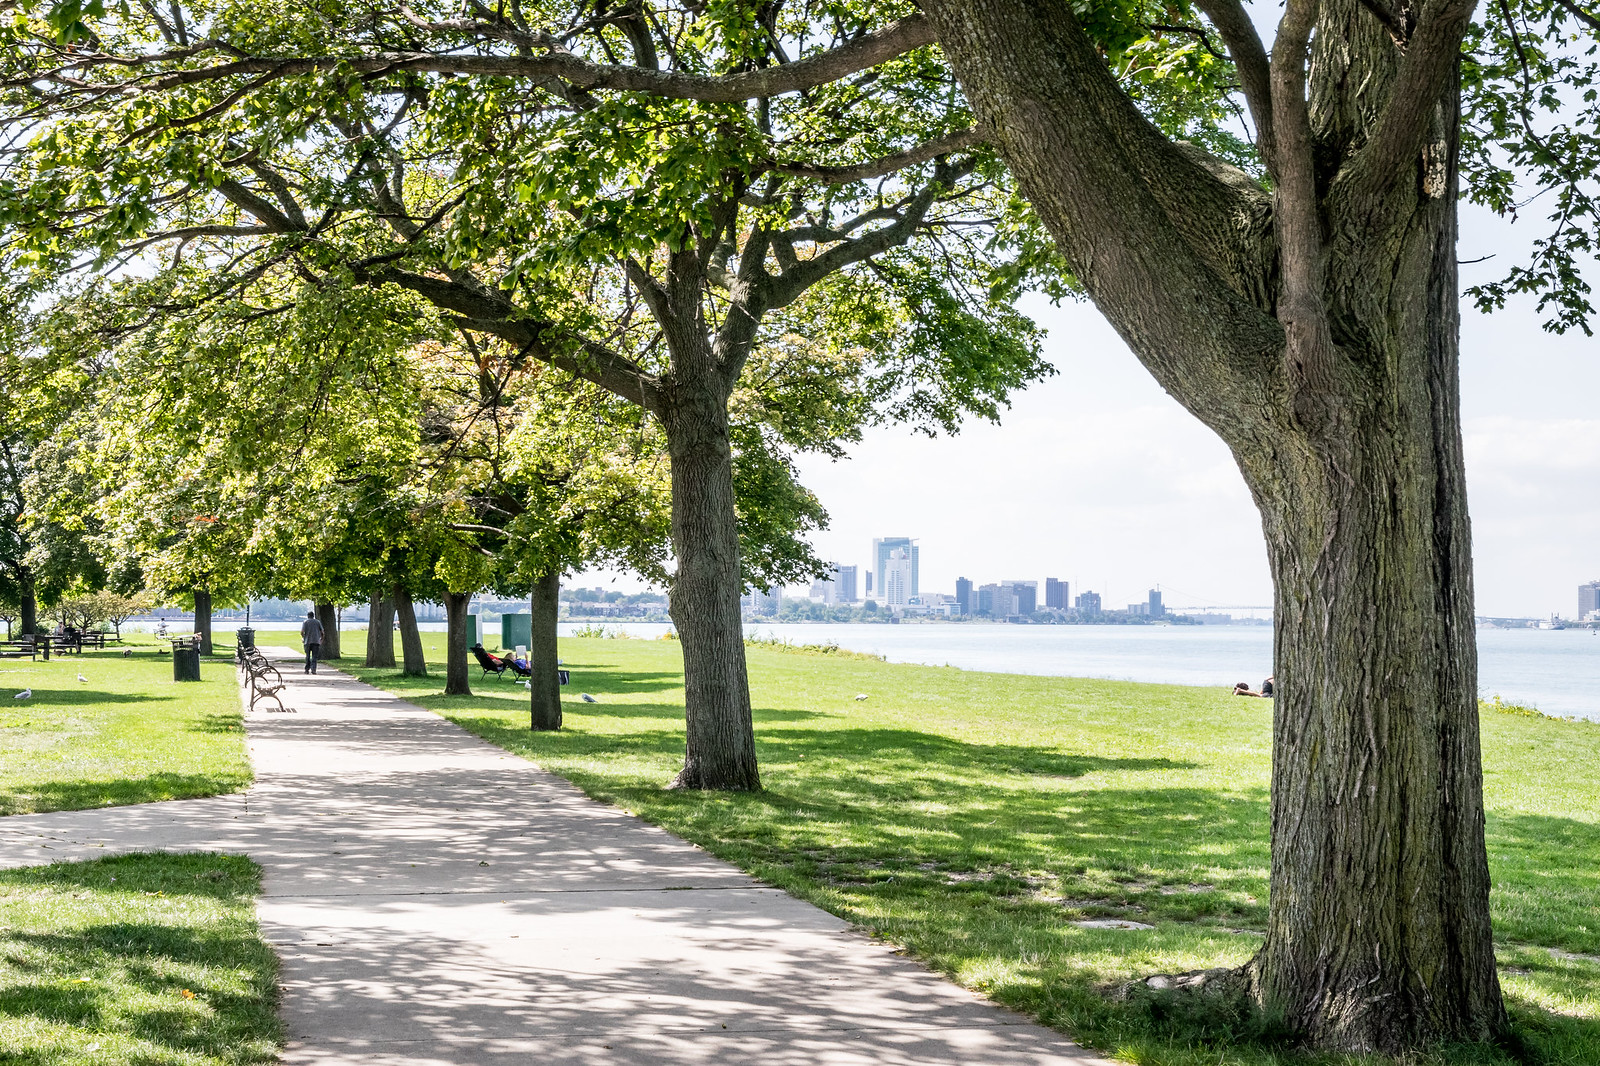 Belle Isle Park is quiet on a warm sunny afternoon